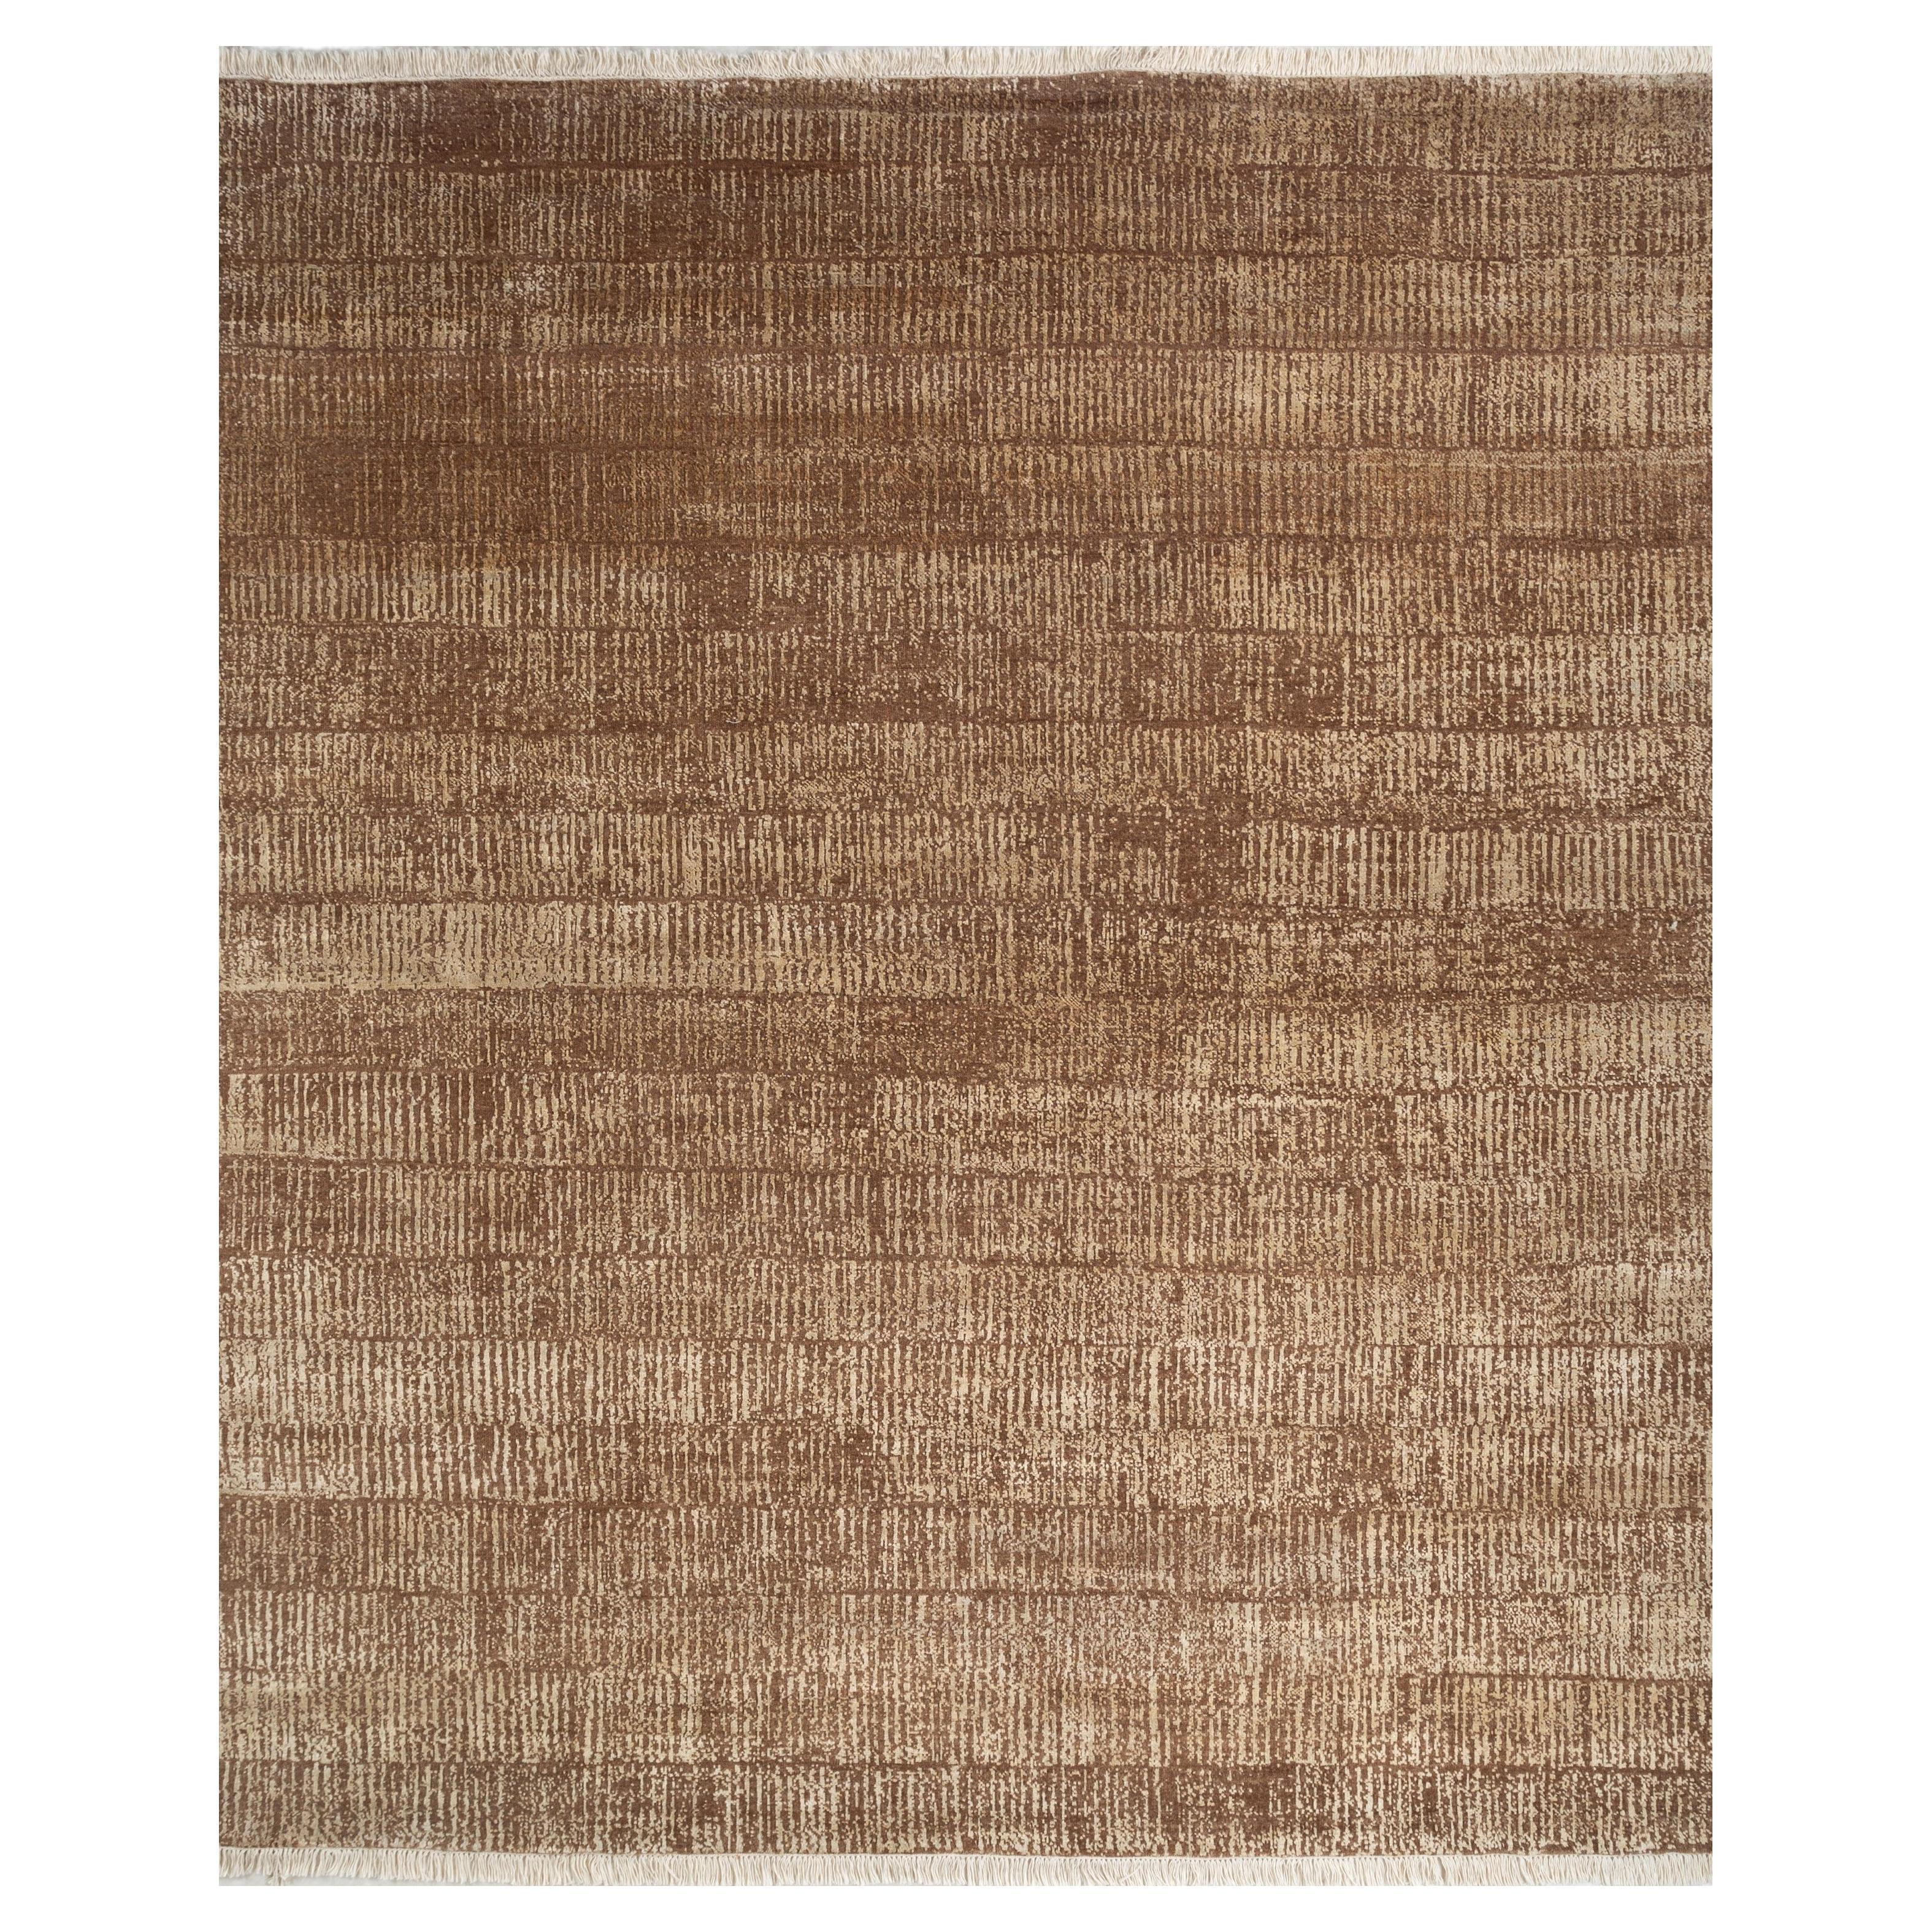  Caramel Rug by Rural Weavers, Knotted, Wool, 240x300cm For Sale